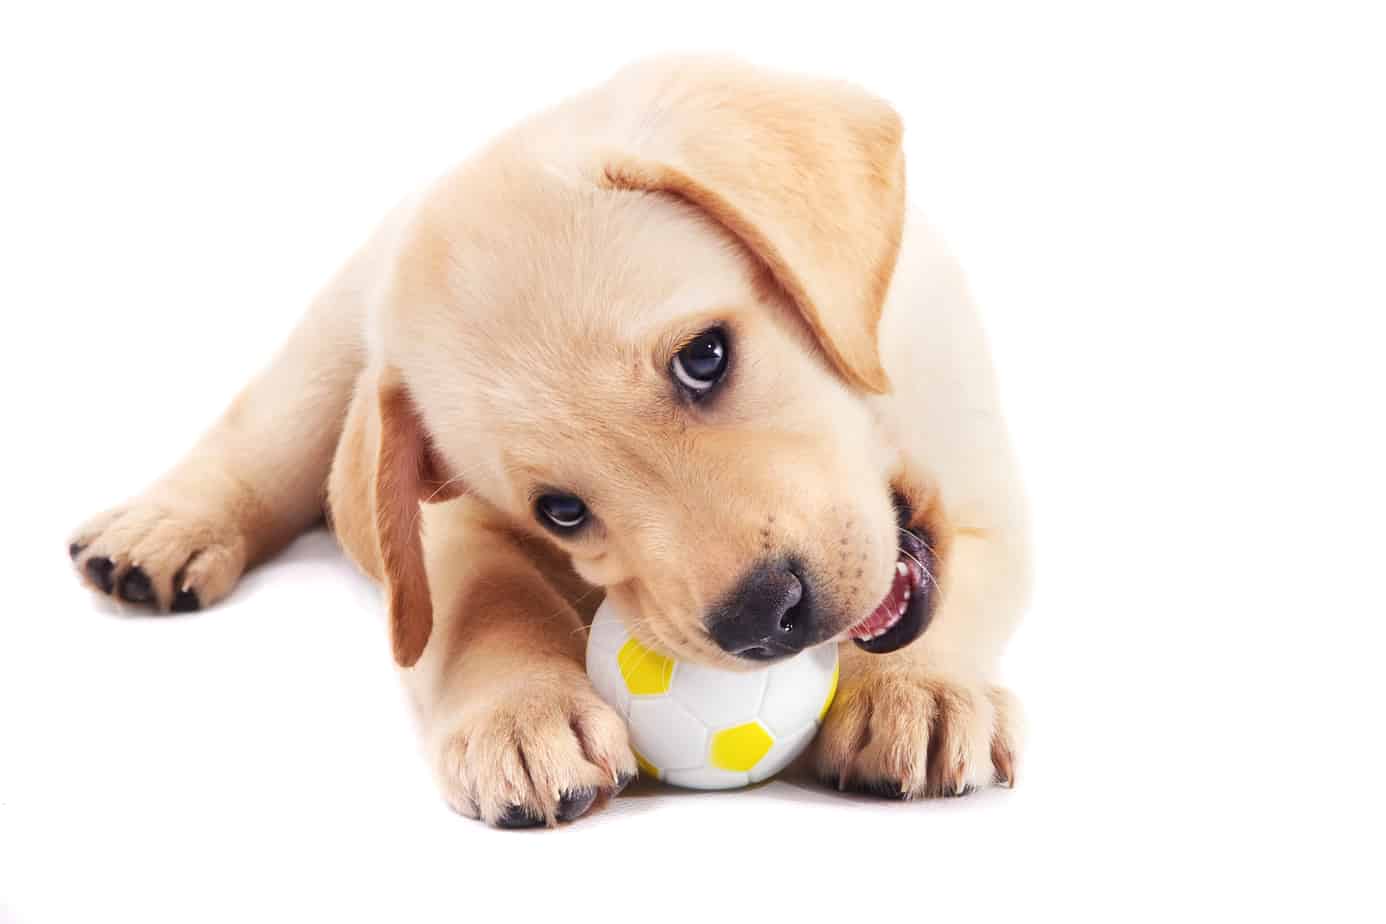 why are dogs obsessed with squeaky toys